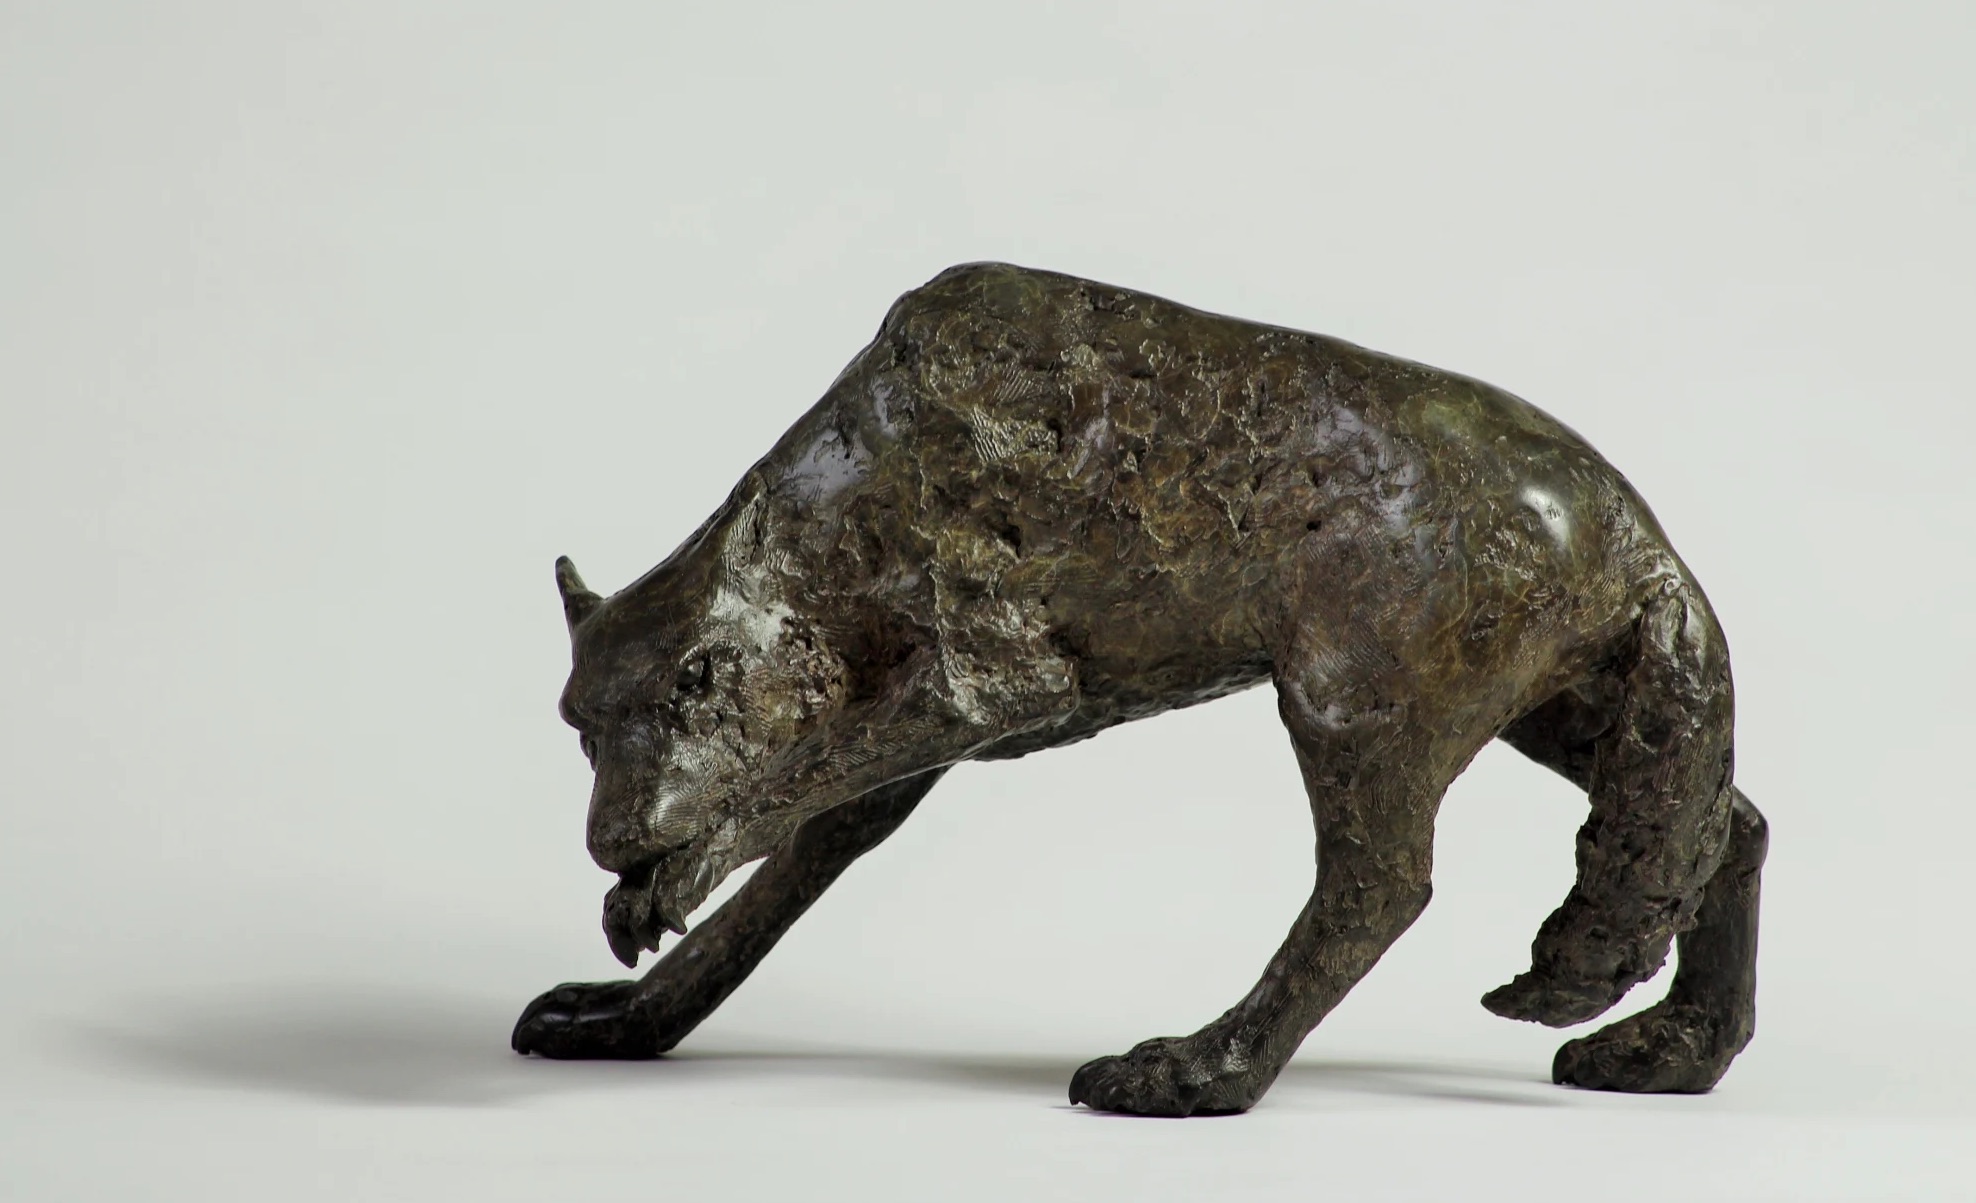 Peter Killeen, The Wolf that bites its Paw, bronze, edition of 9, 27 x 13 x 18cm, 2023 | Peter Killeen: The Medieval Bestiary | Thursday 31 August – Saturday 23 September 2023 | Solomon Fine Art | Peter Killeen, The Wolf that bites its Paw, bronze, edition of 9, 27 x 13 x 18cm, 2023 – realistic bronze model of a wold doing just what the title says; its left front paw is raised, and the head lowered with the mouth seizing the paw; we have a side-on view; the sculpture is photographed against a white surface curving into a white background, with minimal shadow from lighting mostly to the right 